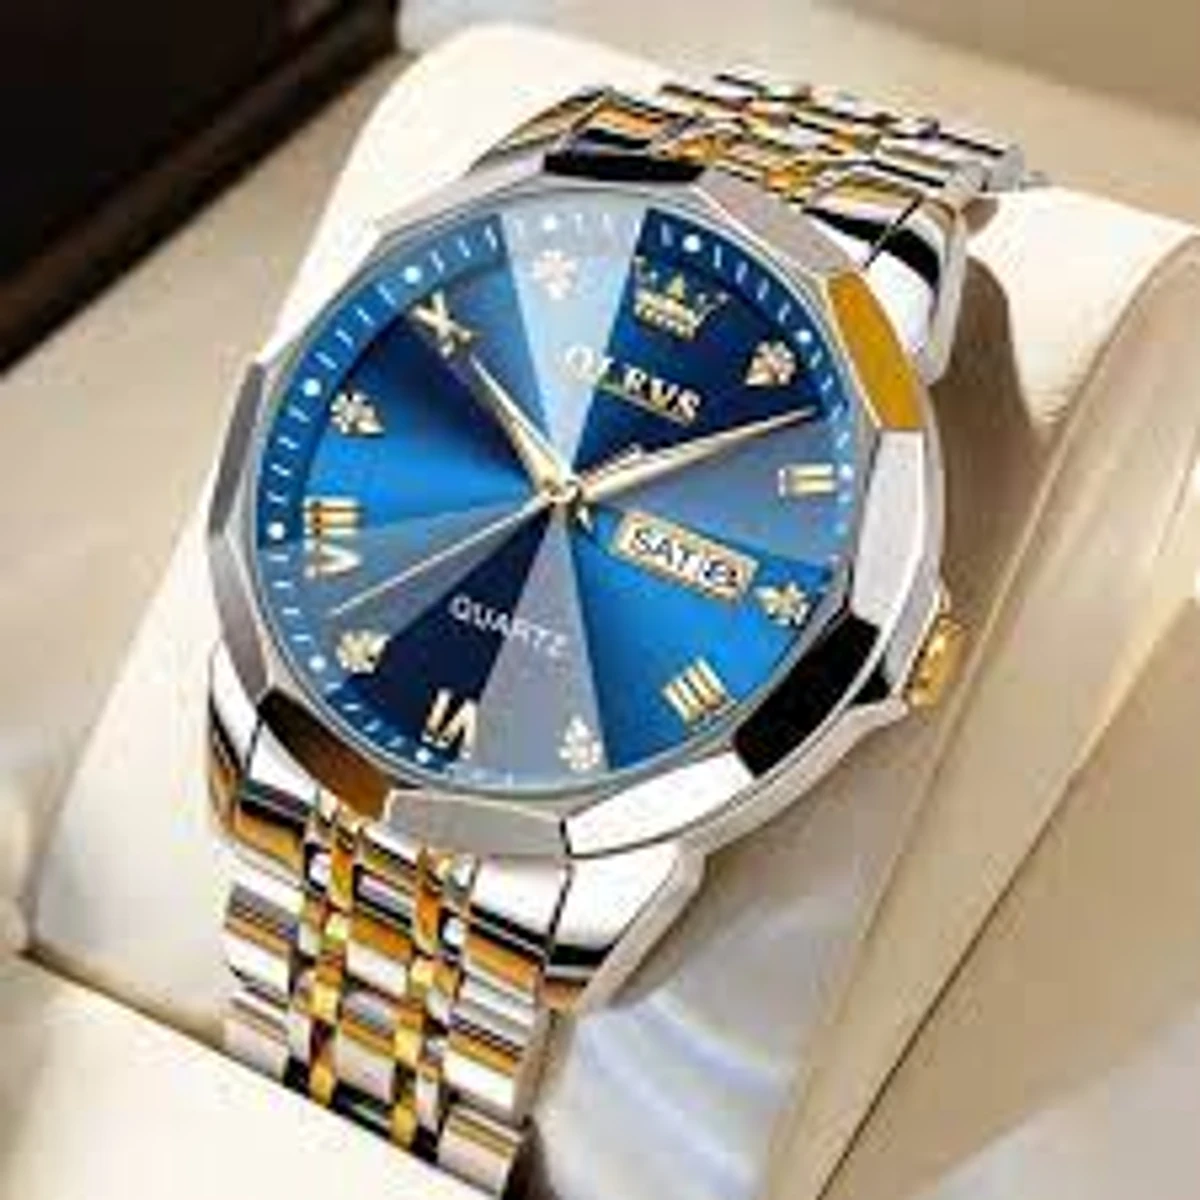 2023 New Luxury OLEVS MODEL 9931 Watch for Men Stainless Steel Waterproof Watches - 9931 TOTON AR DIAL BLUE